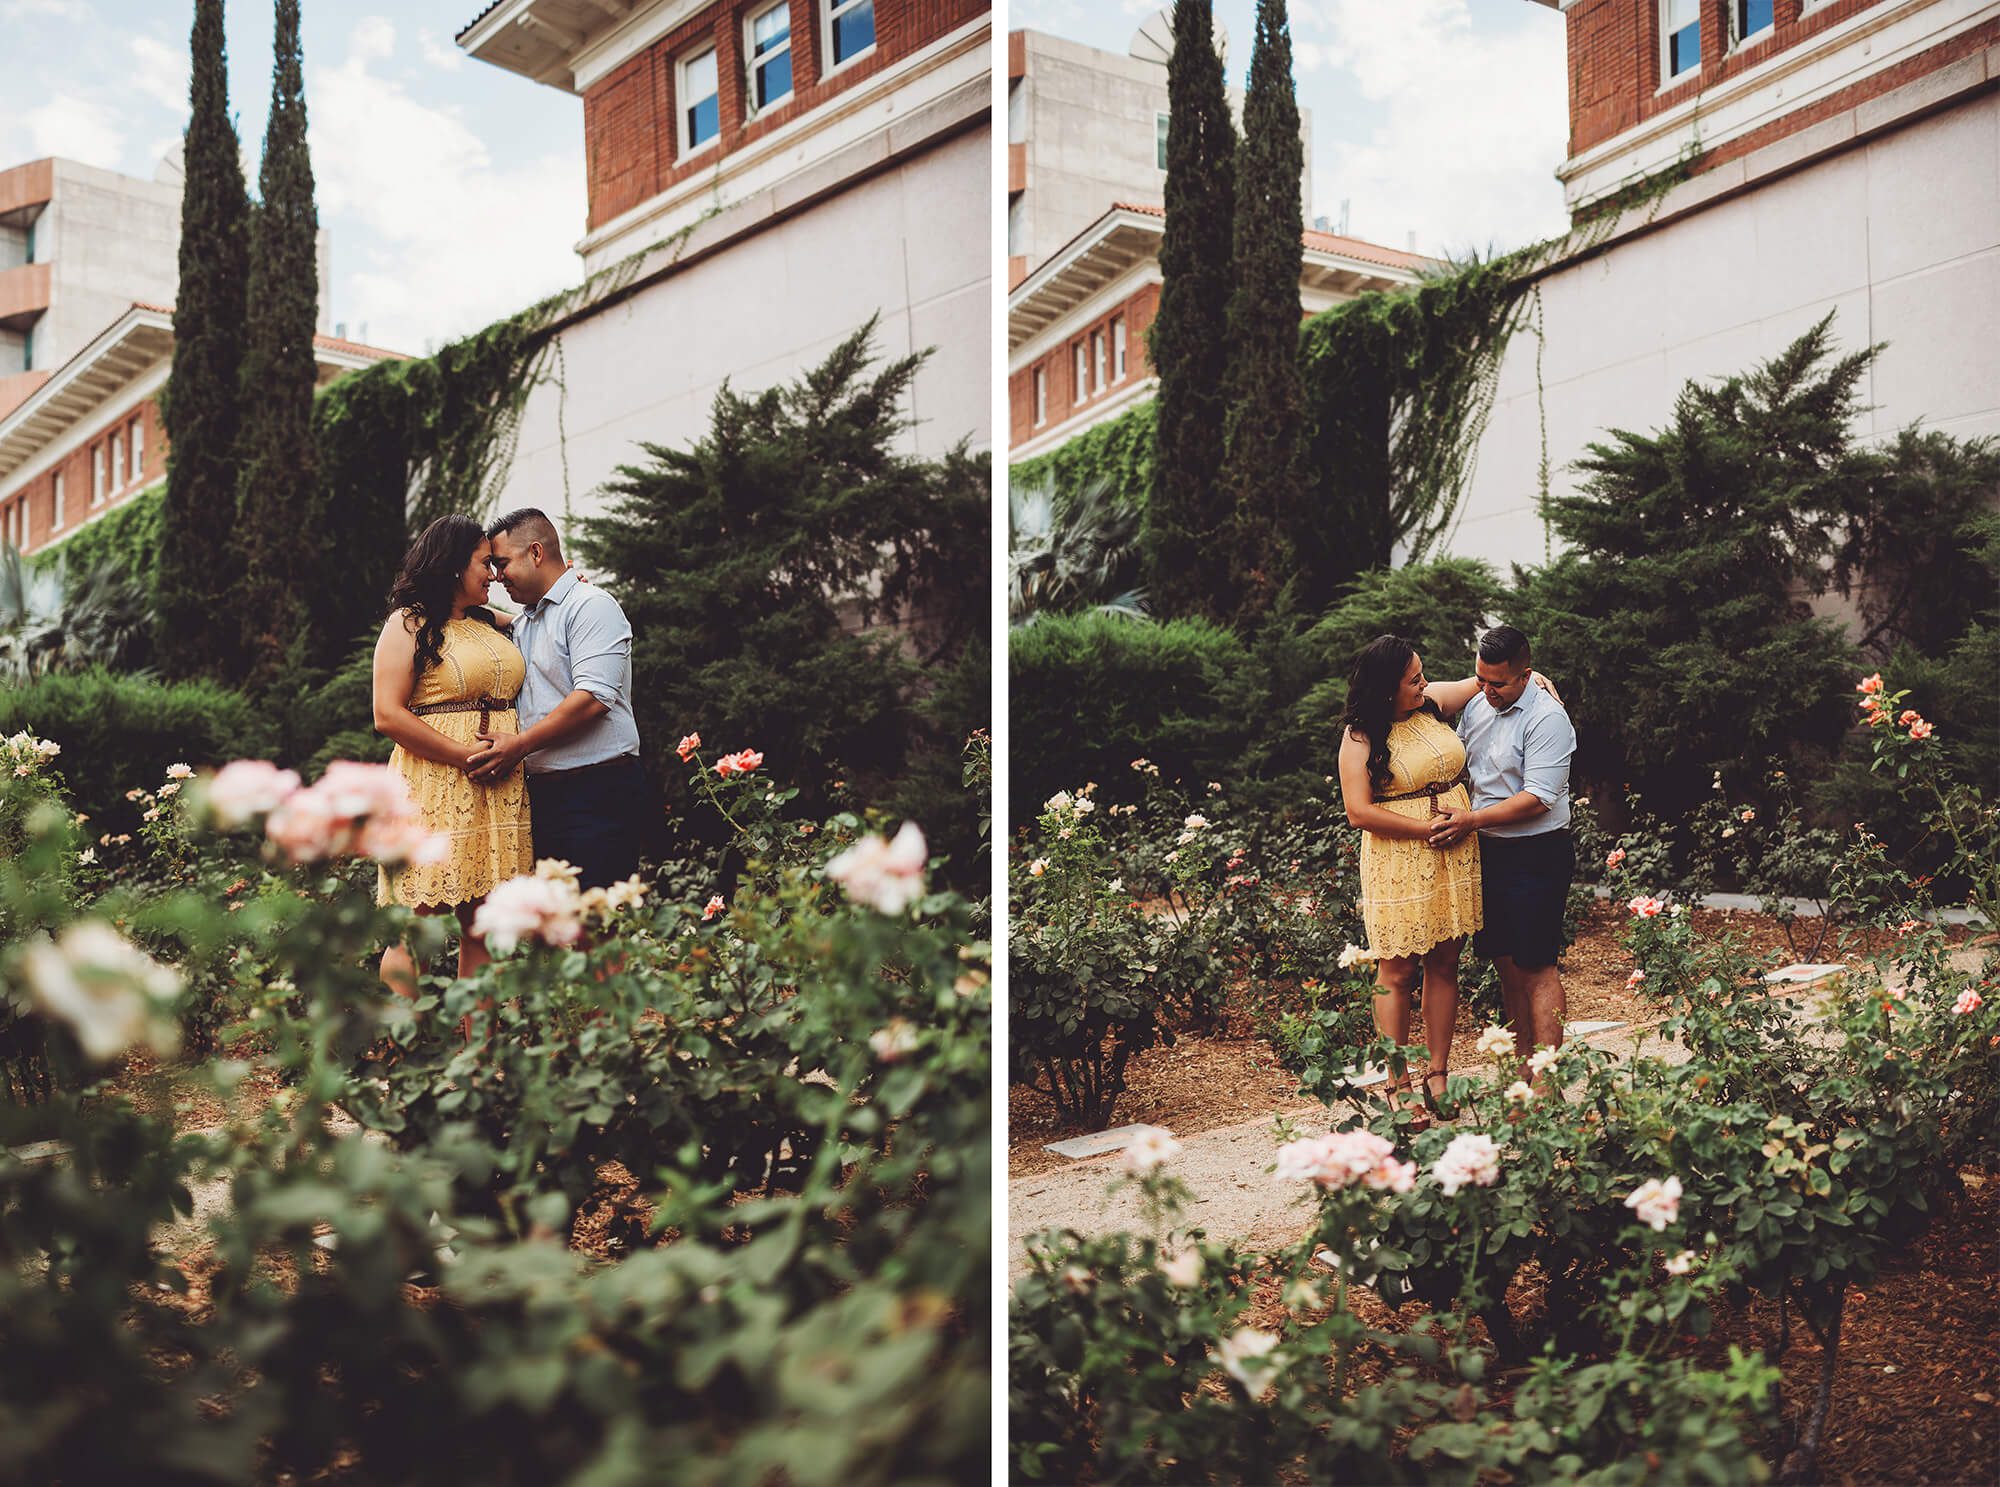 The rose garden at U of A, a beautiful location for a baby announcement session.